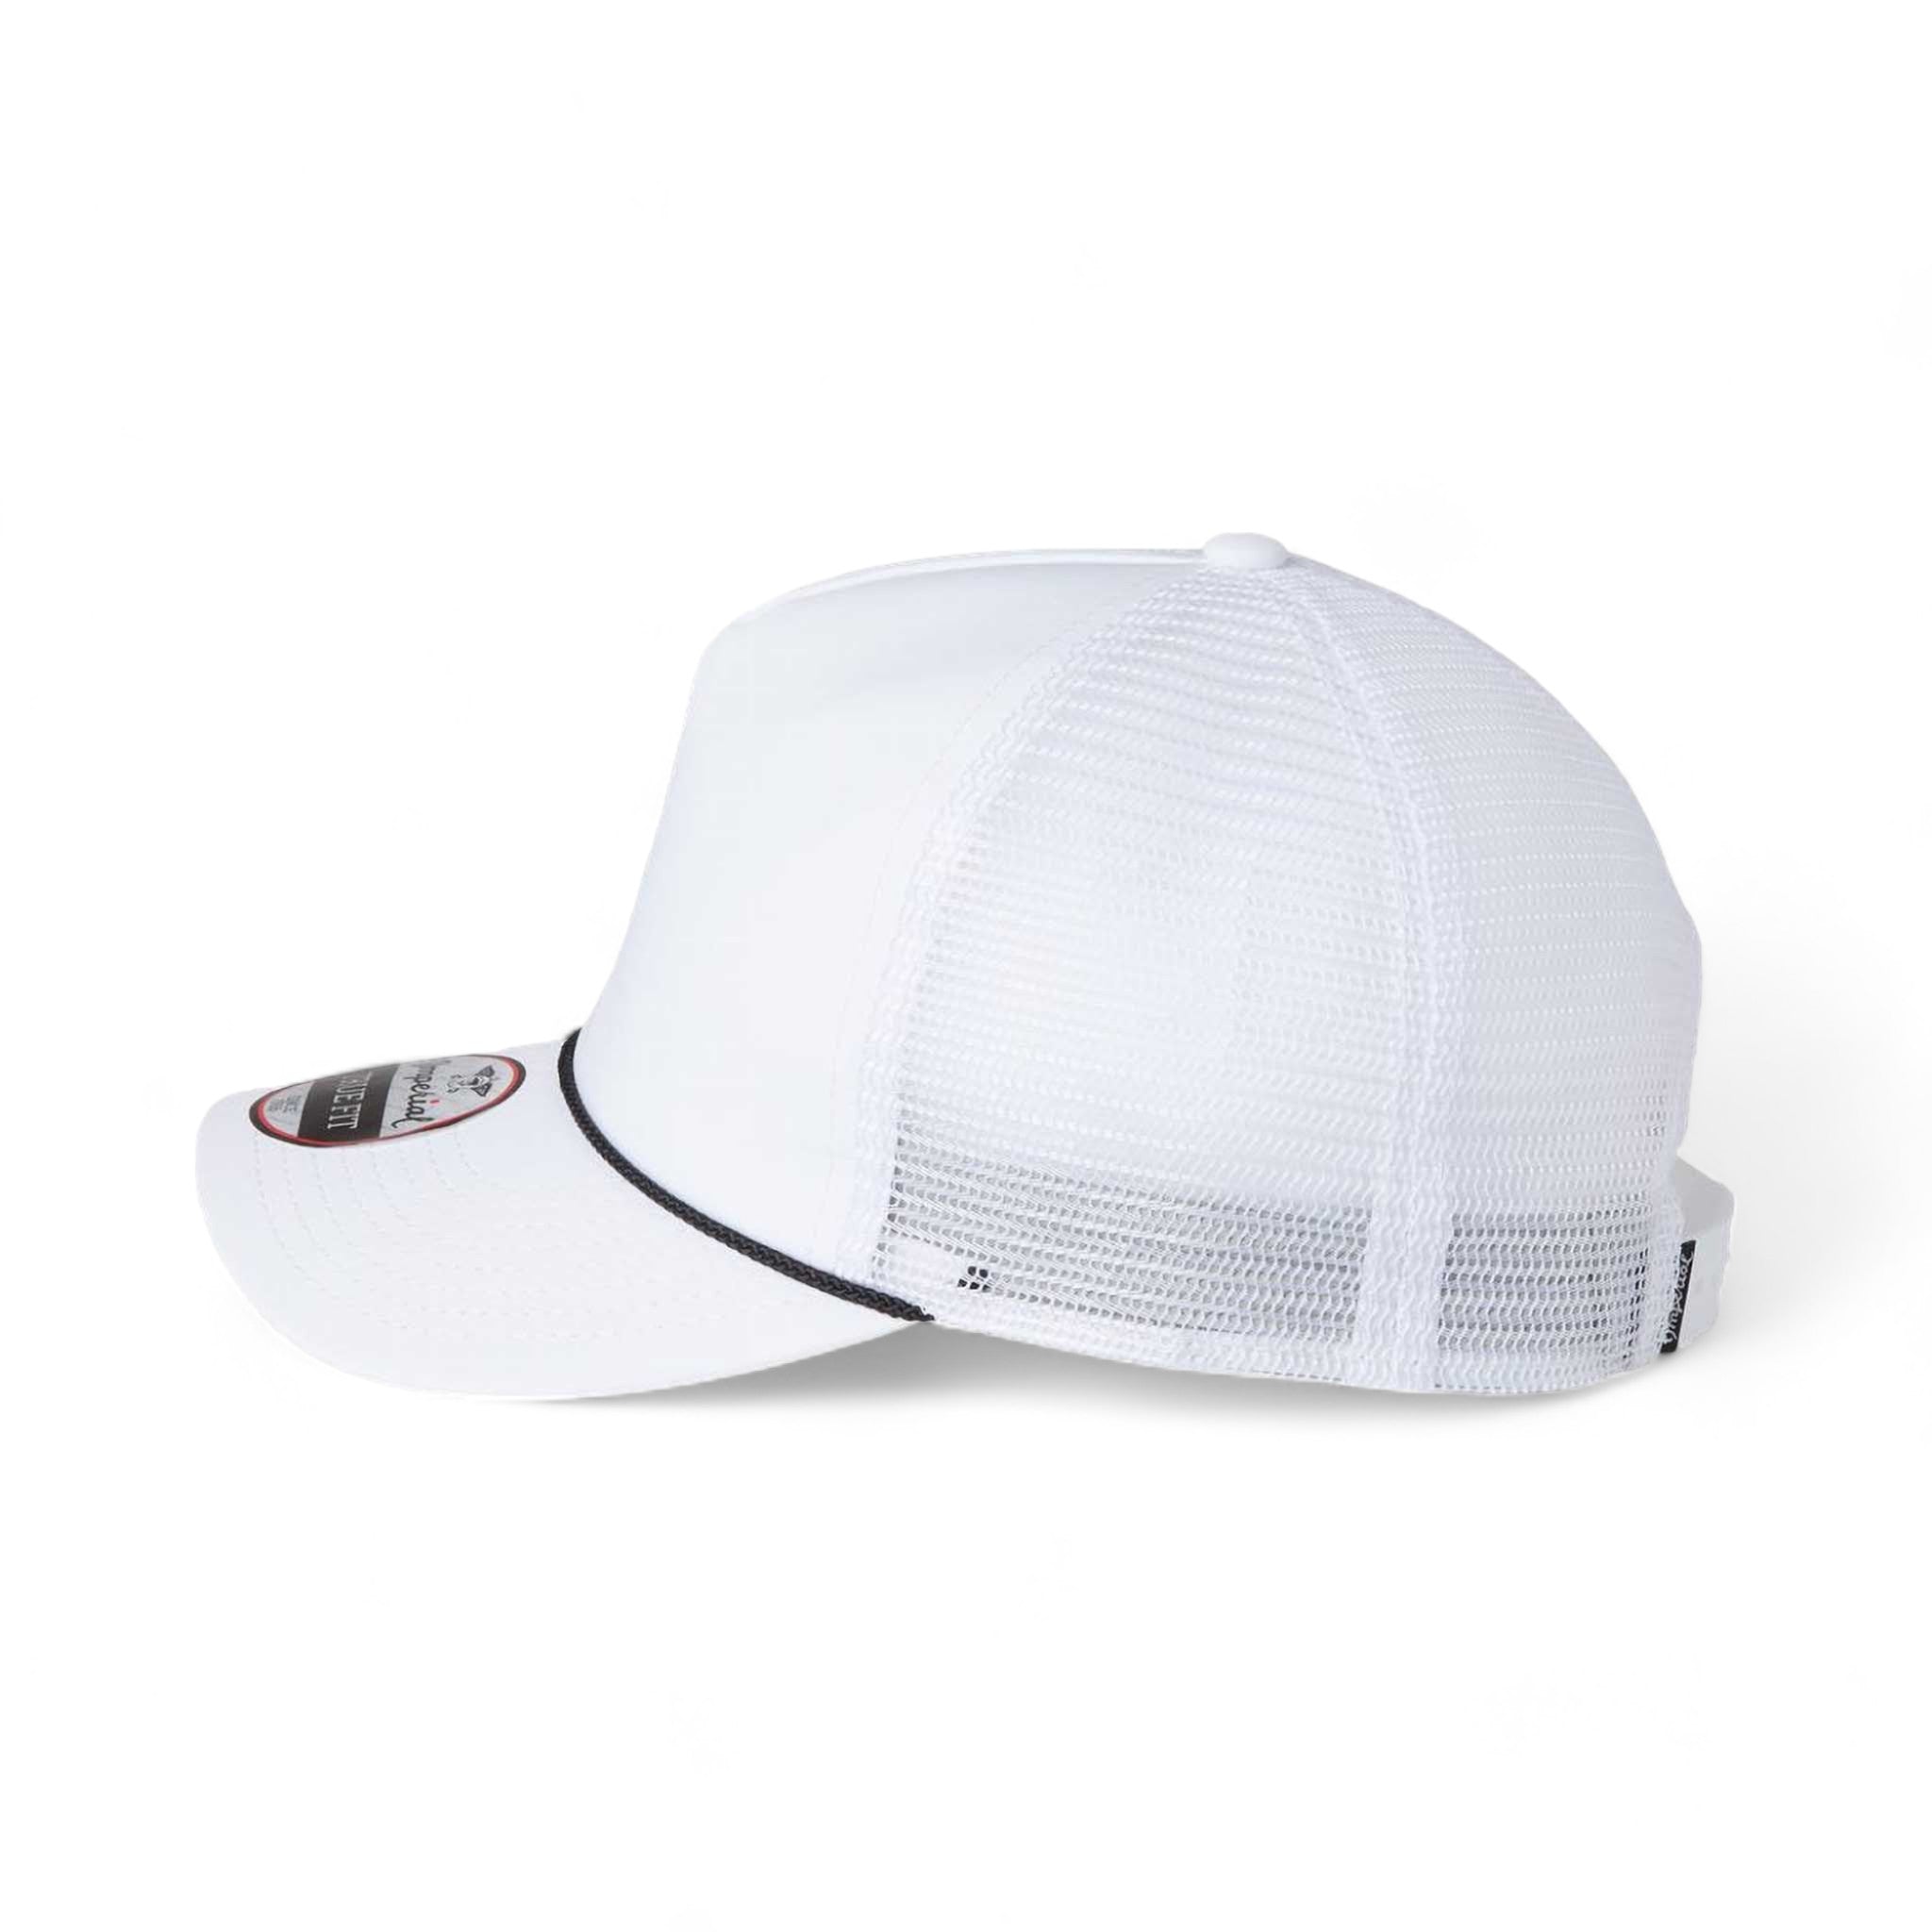 Side view of Imperial 5055 custom hat in white, white and black